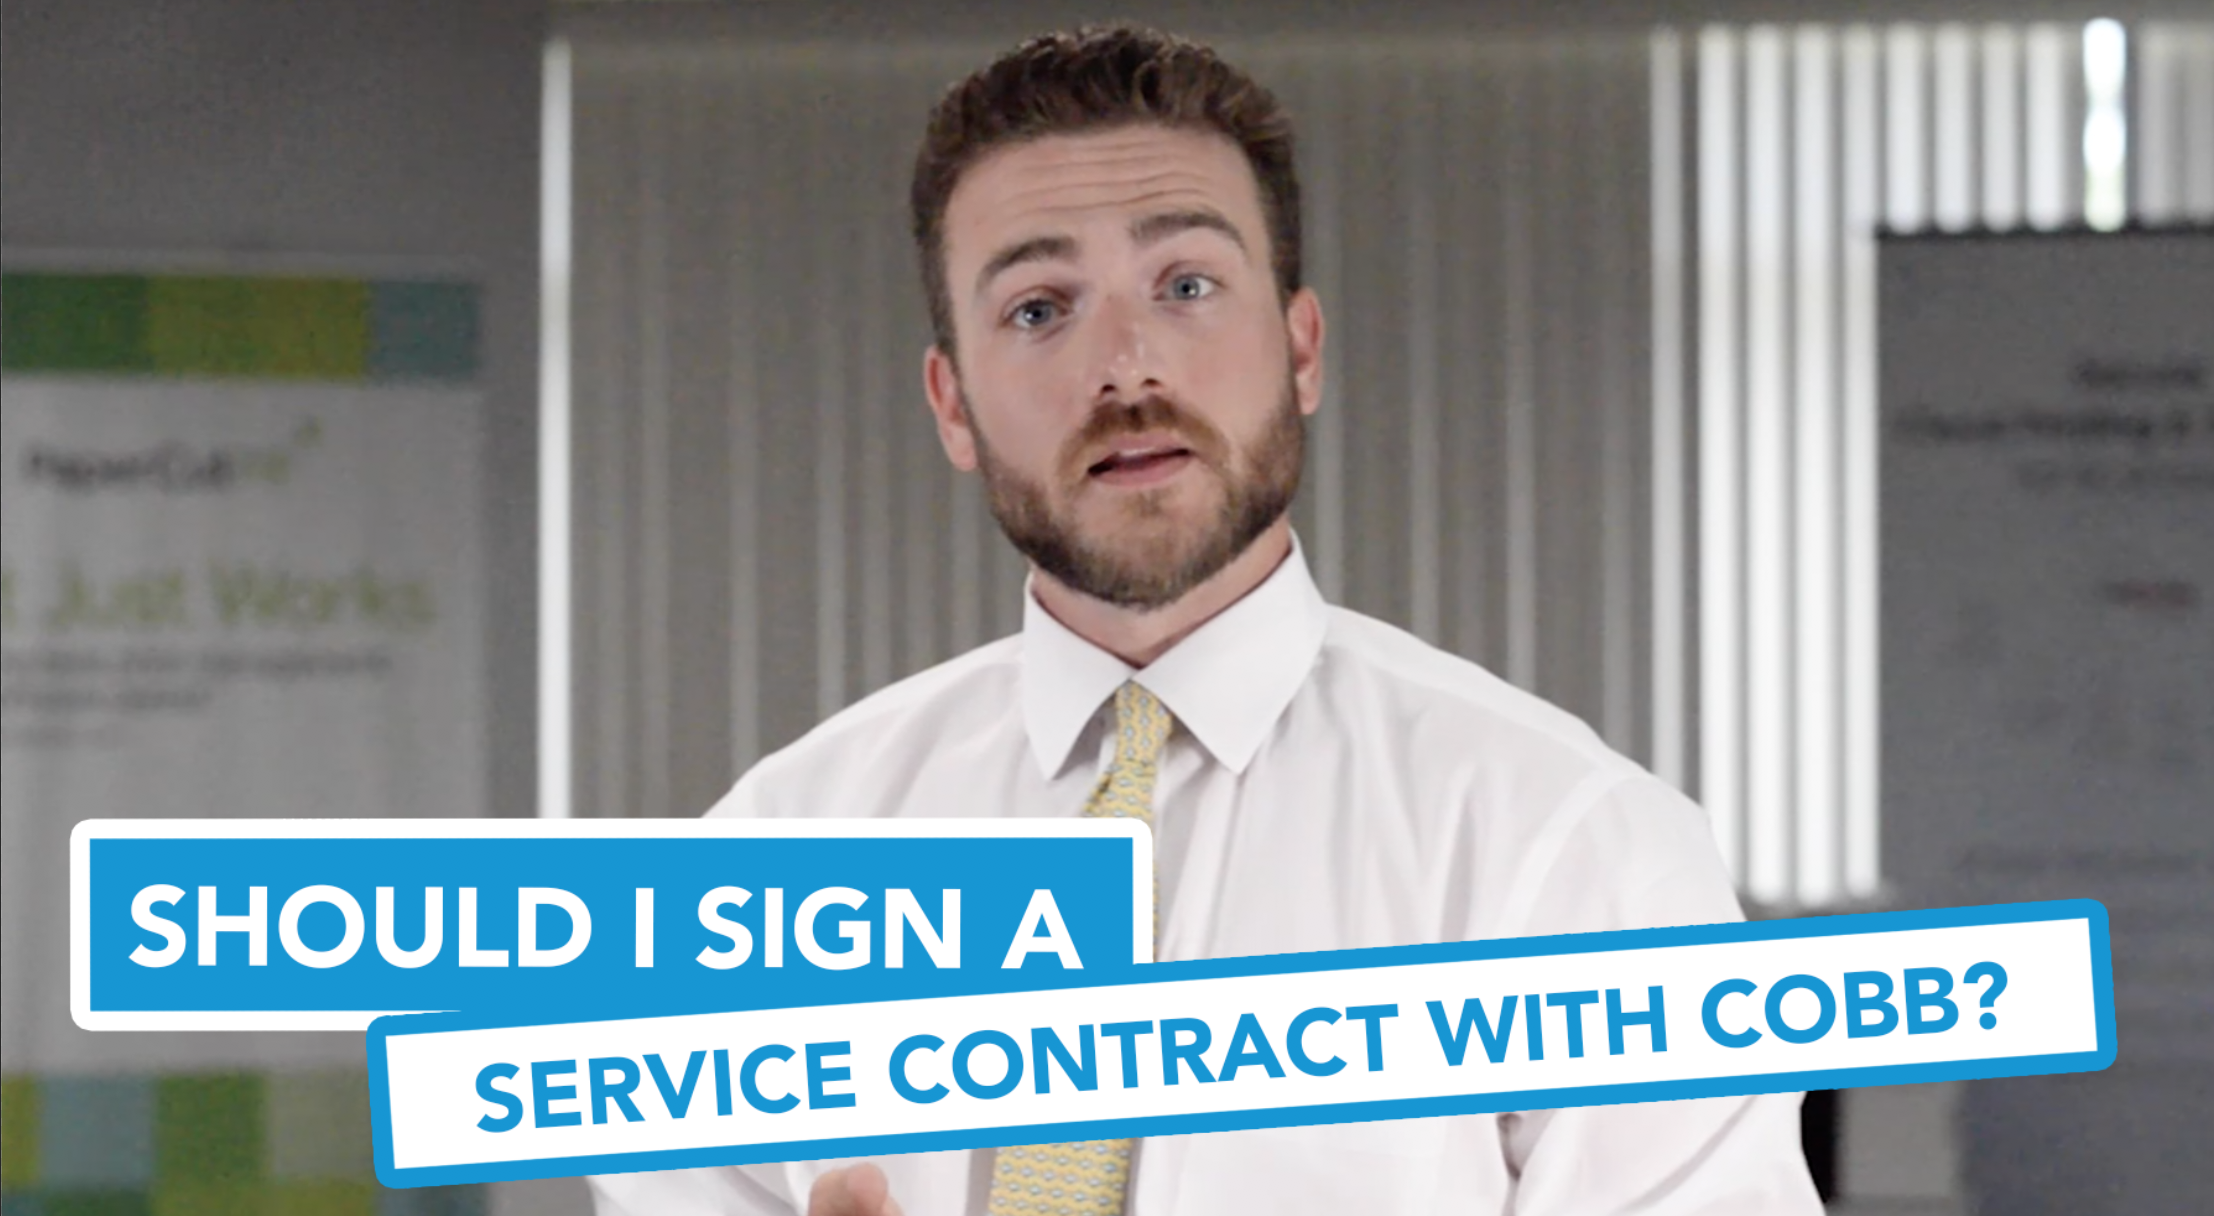 Should I Sign a Service Contract With Cobb?